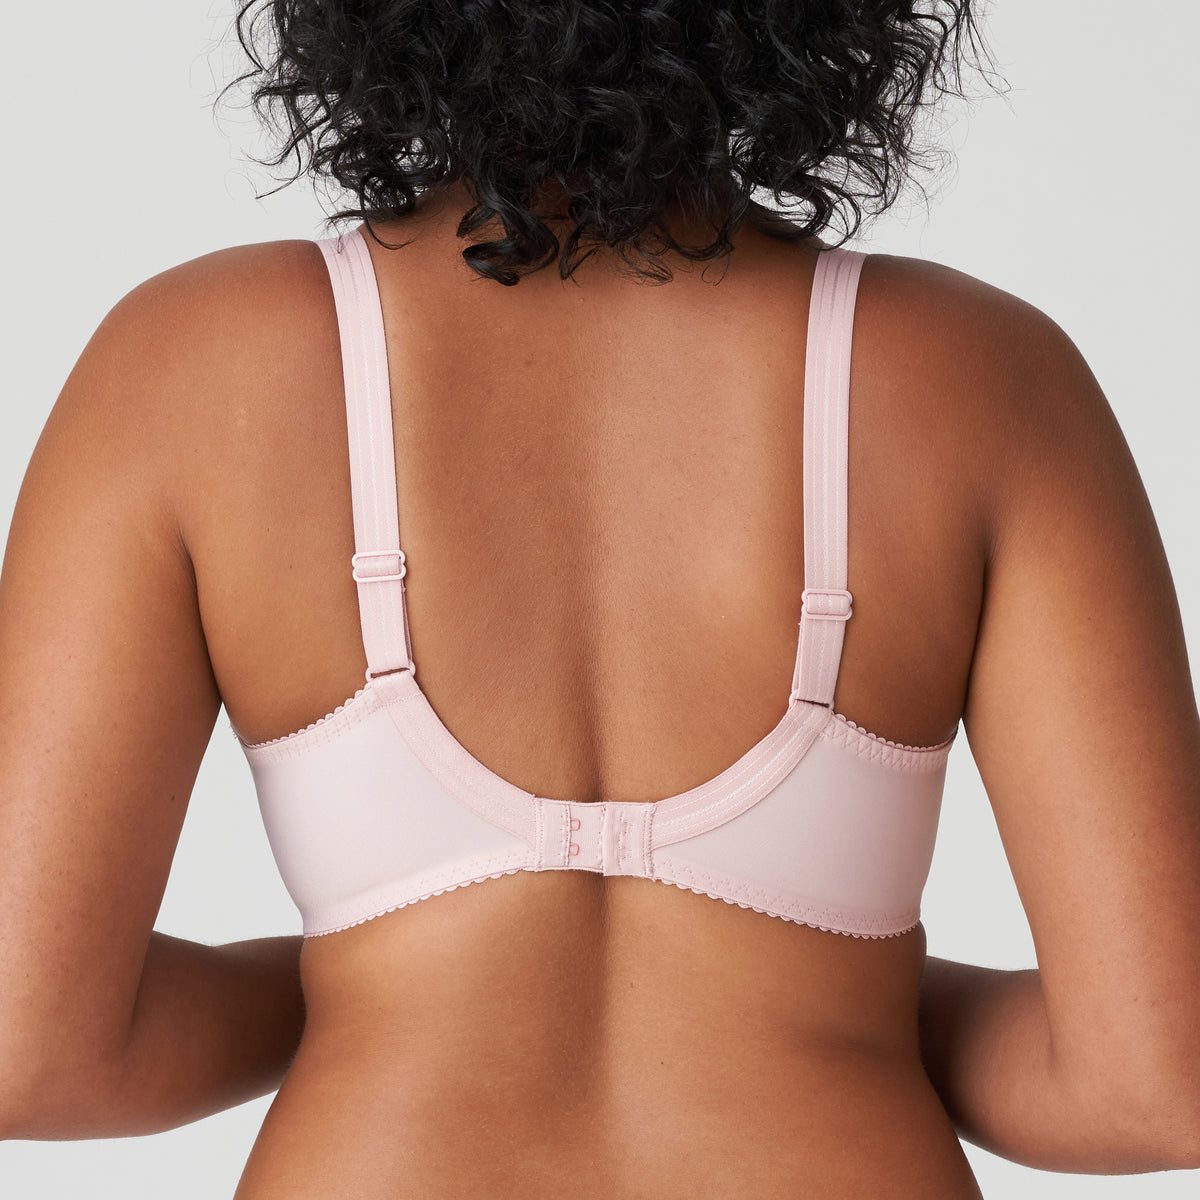 Deauville underwired full cup support I-K bra - Amour Pink, Prima Donna